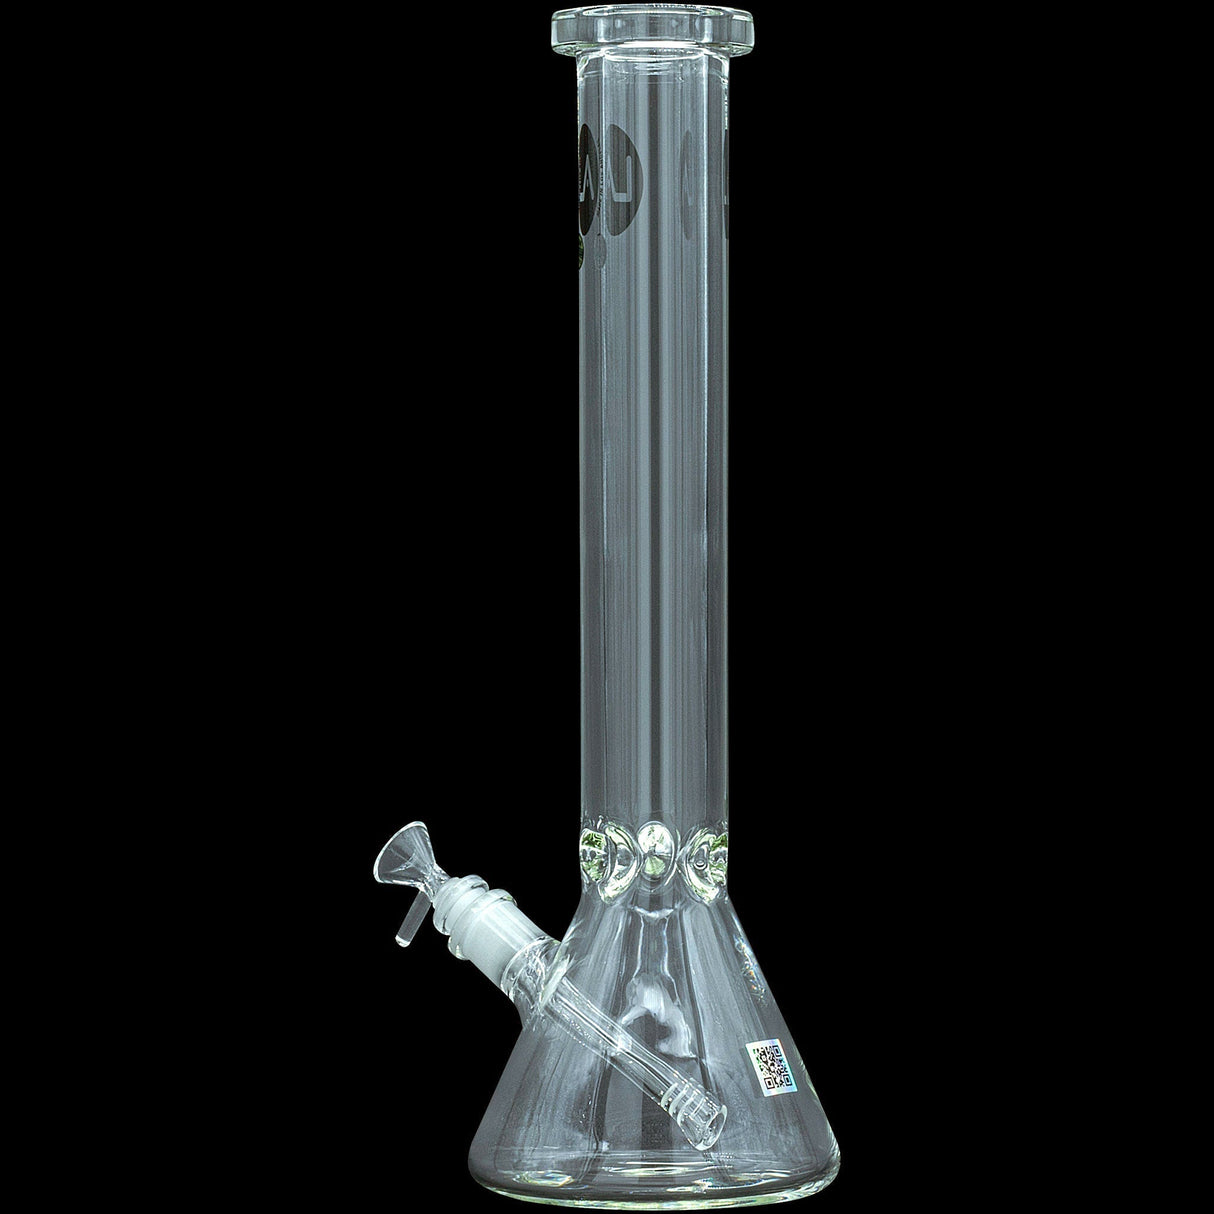 LA Pipes "Squared Up" clear beaker bong, 9mm thick borosilicate glass, 16" tall, front view